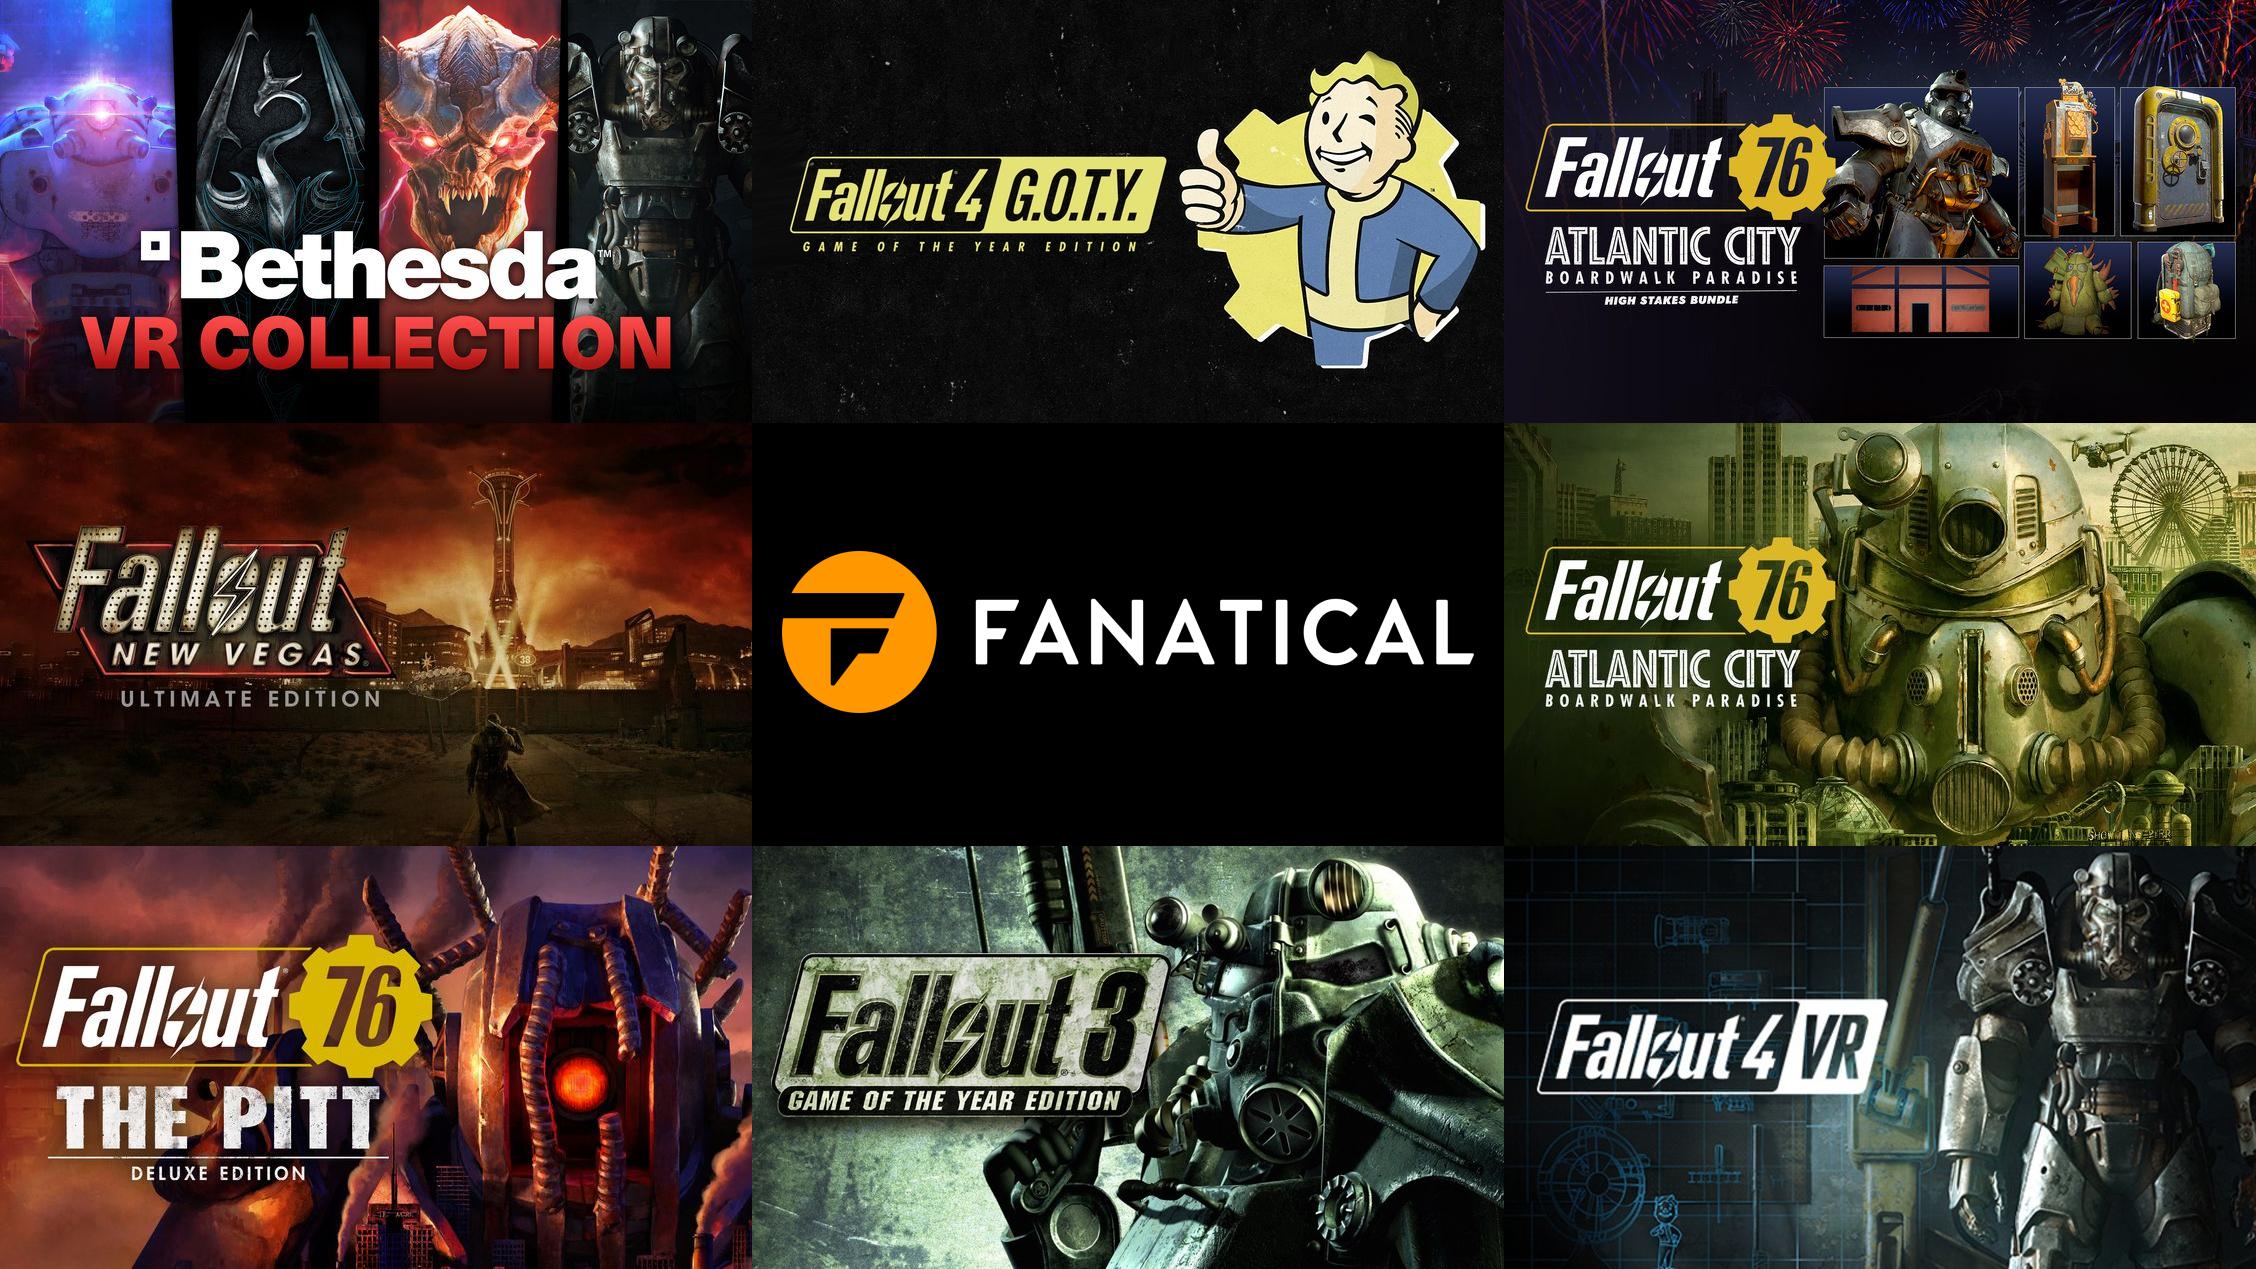 Linking Fanatical and Steam accounts – Fanatical.com Customer Services